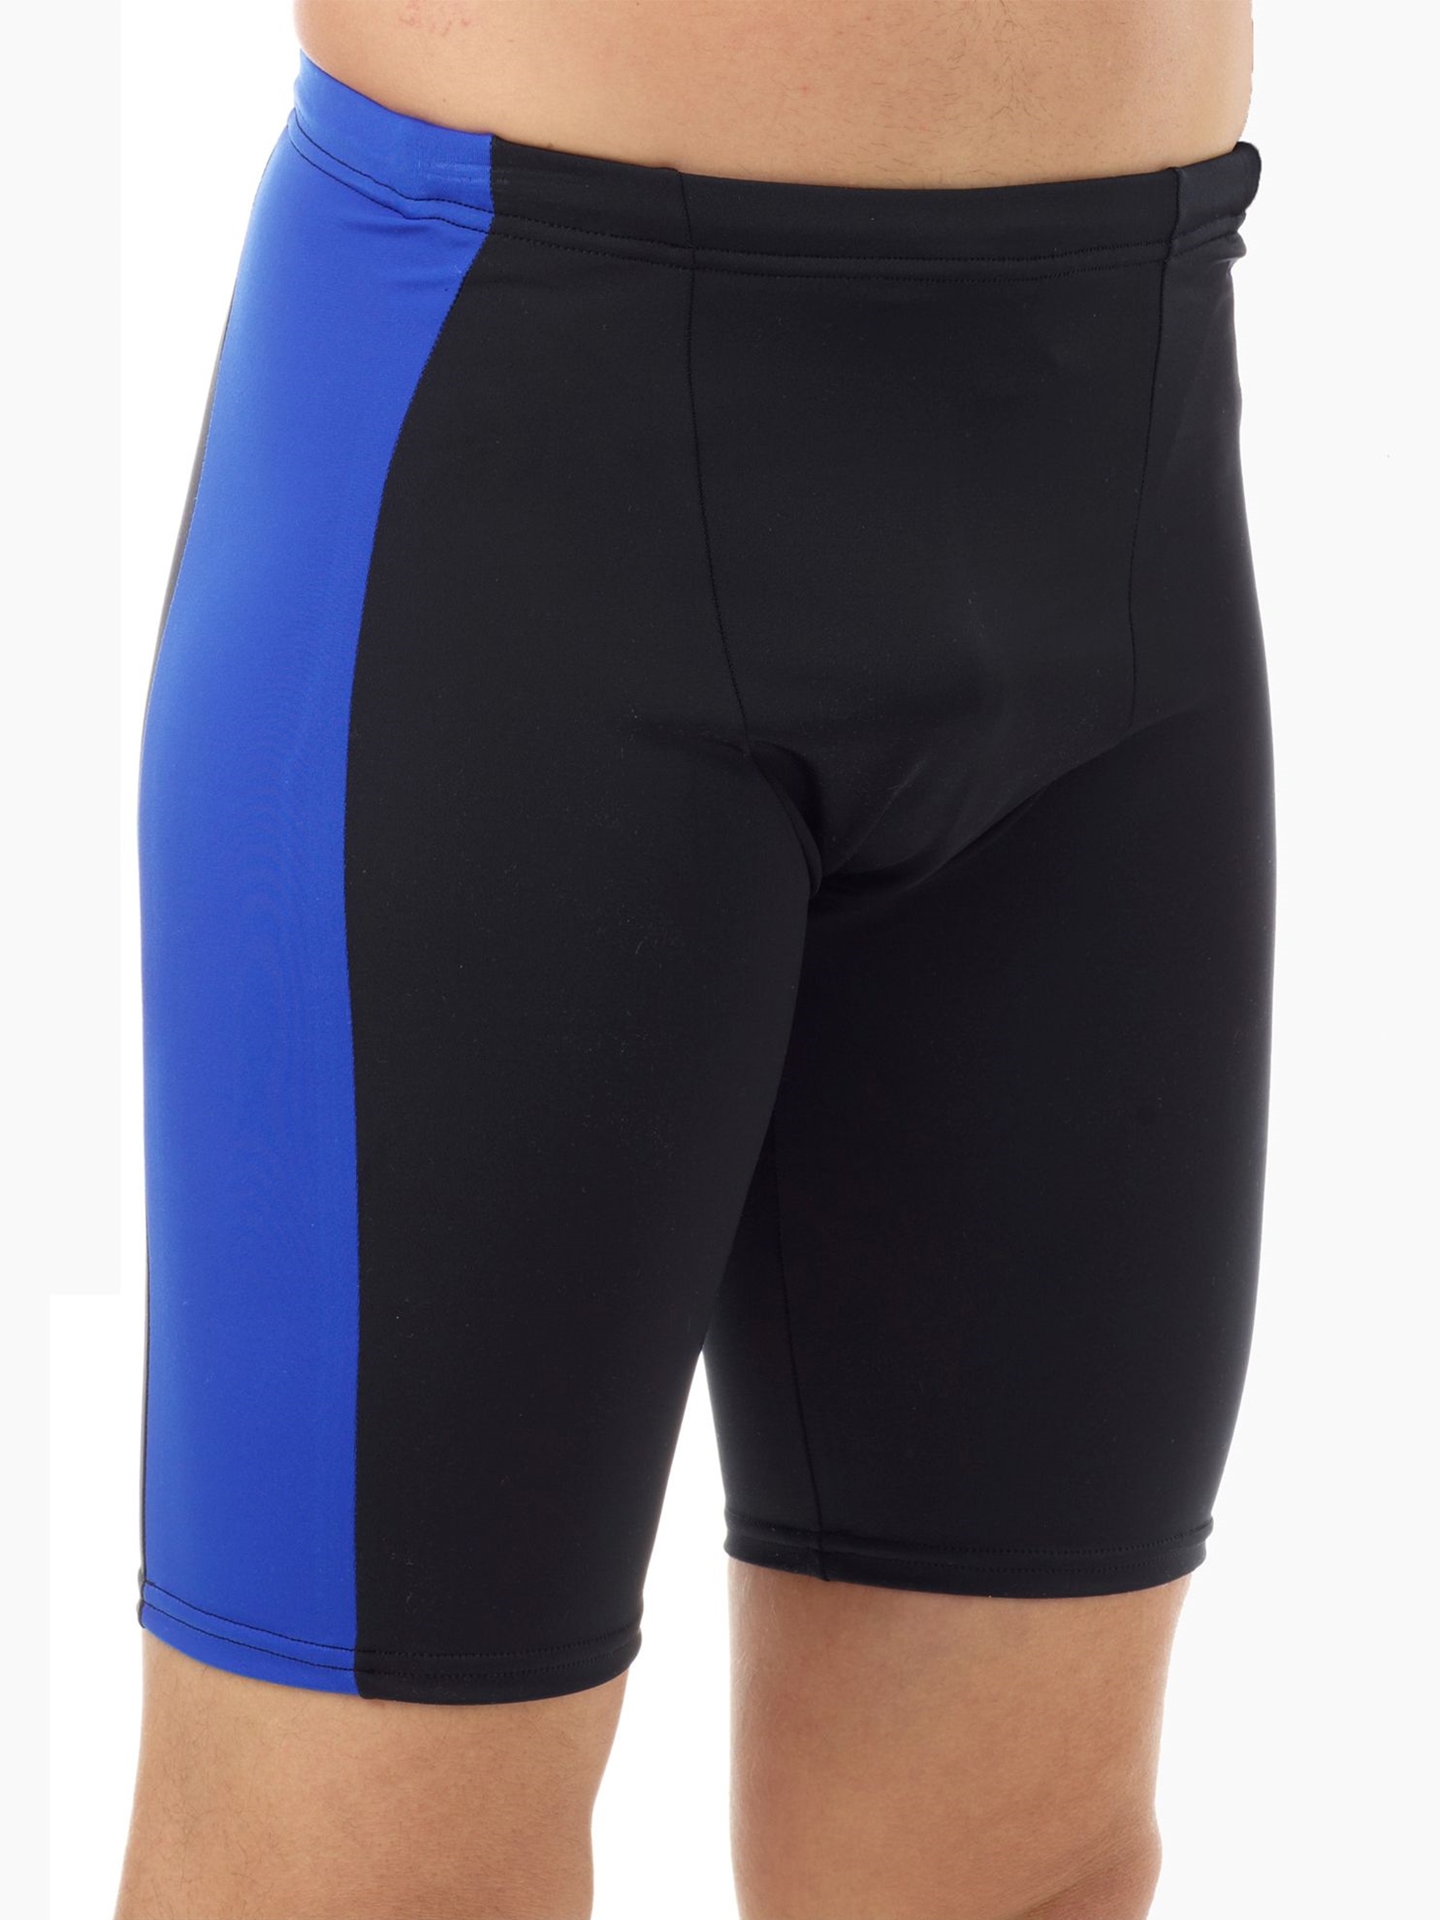 Compression Swim Shorts for FTM. FTM Chest Binders for Trans Men by  Underworks